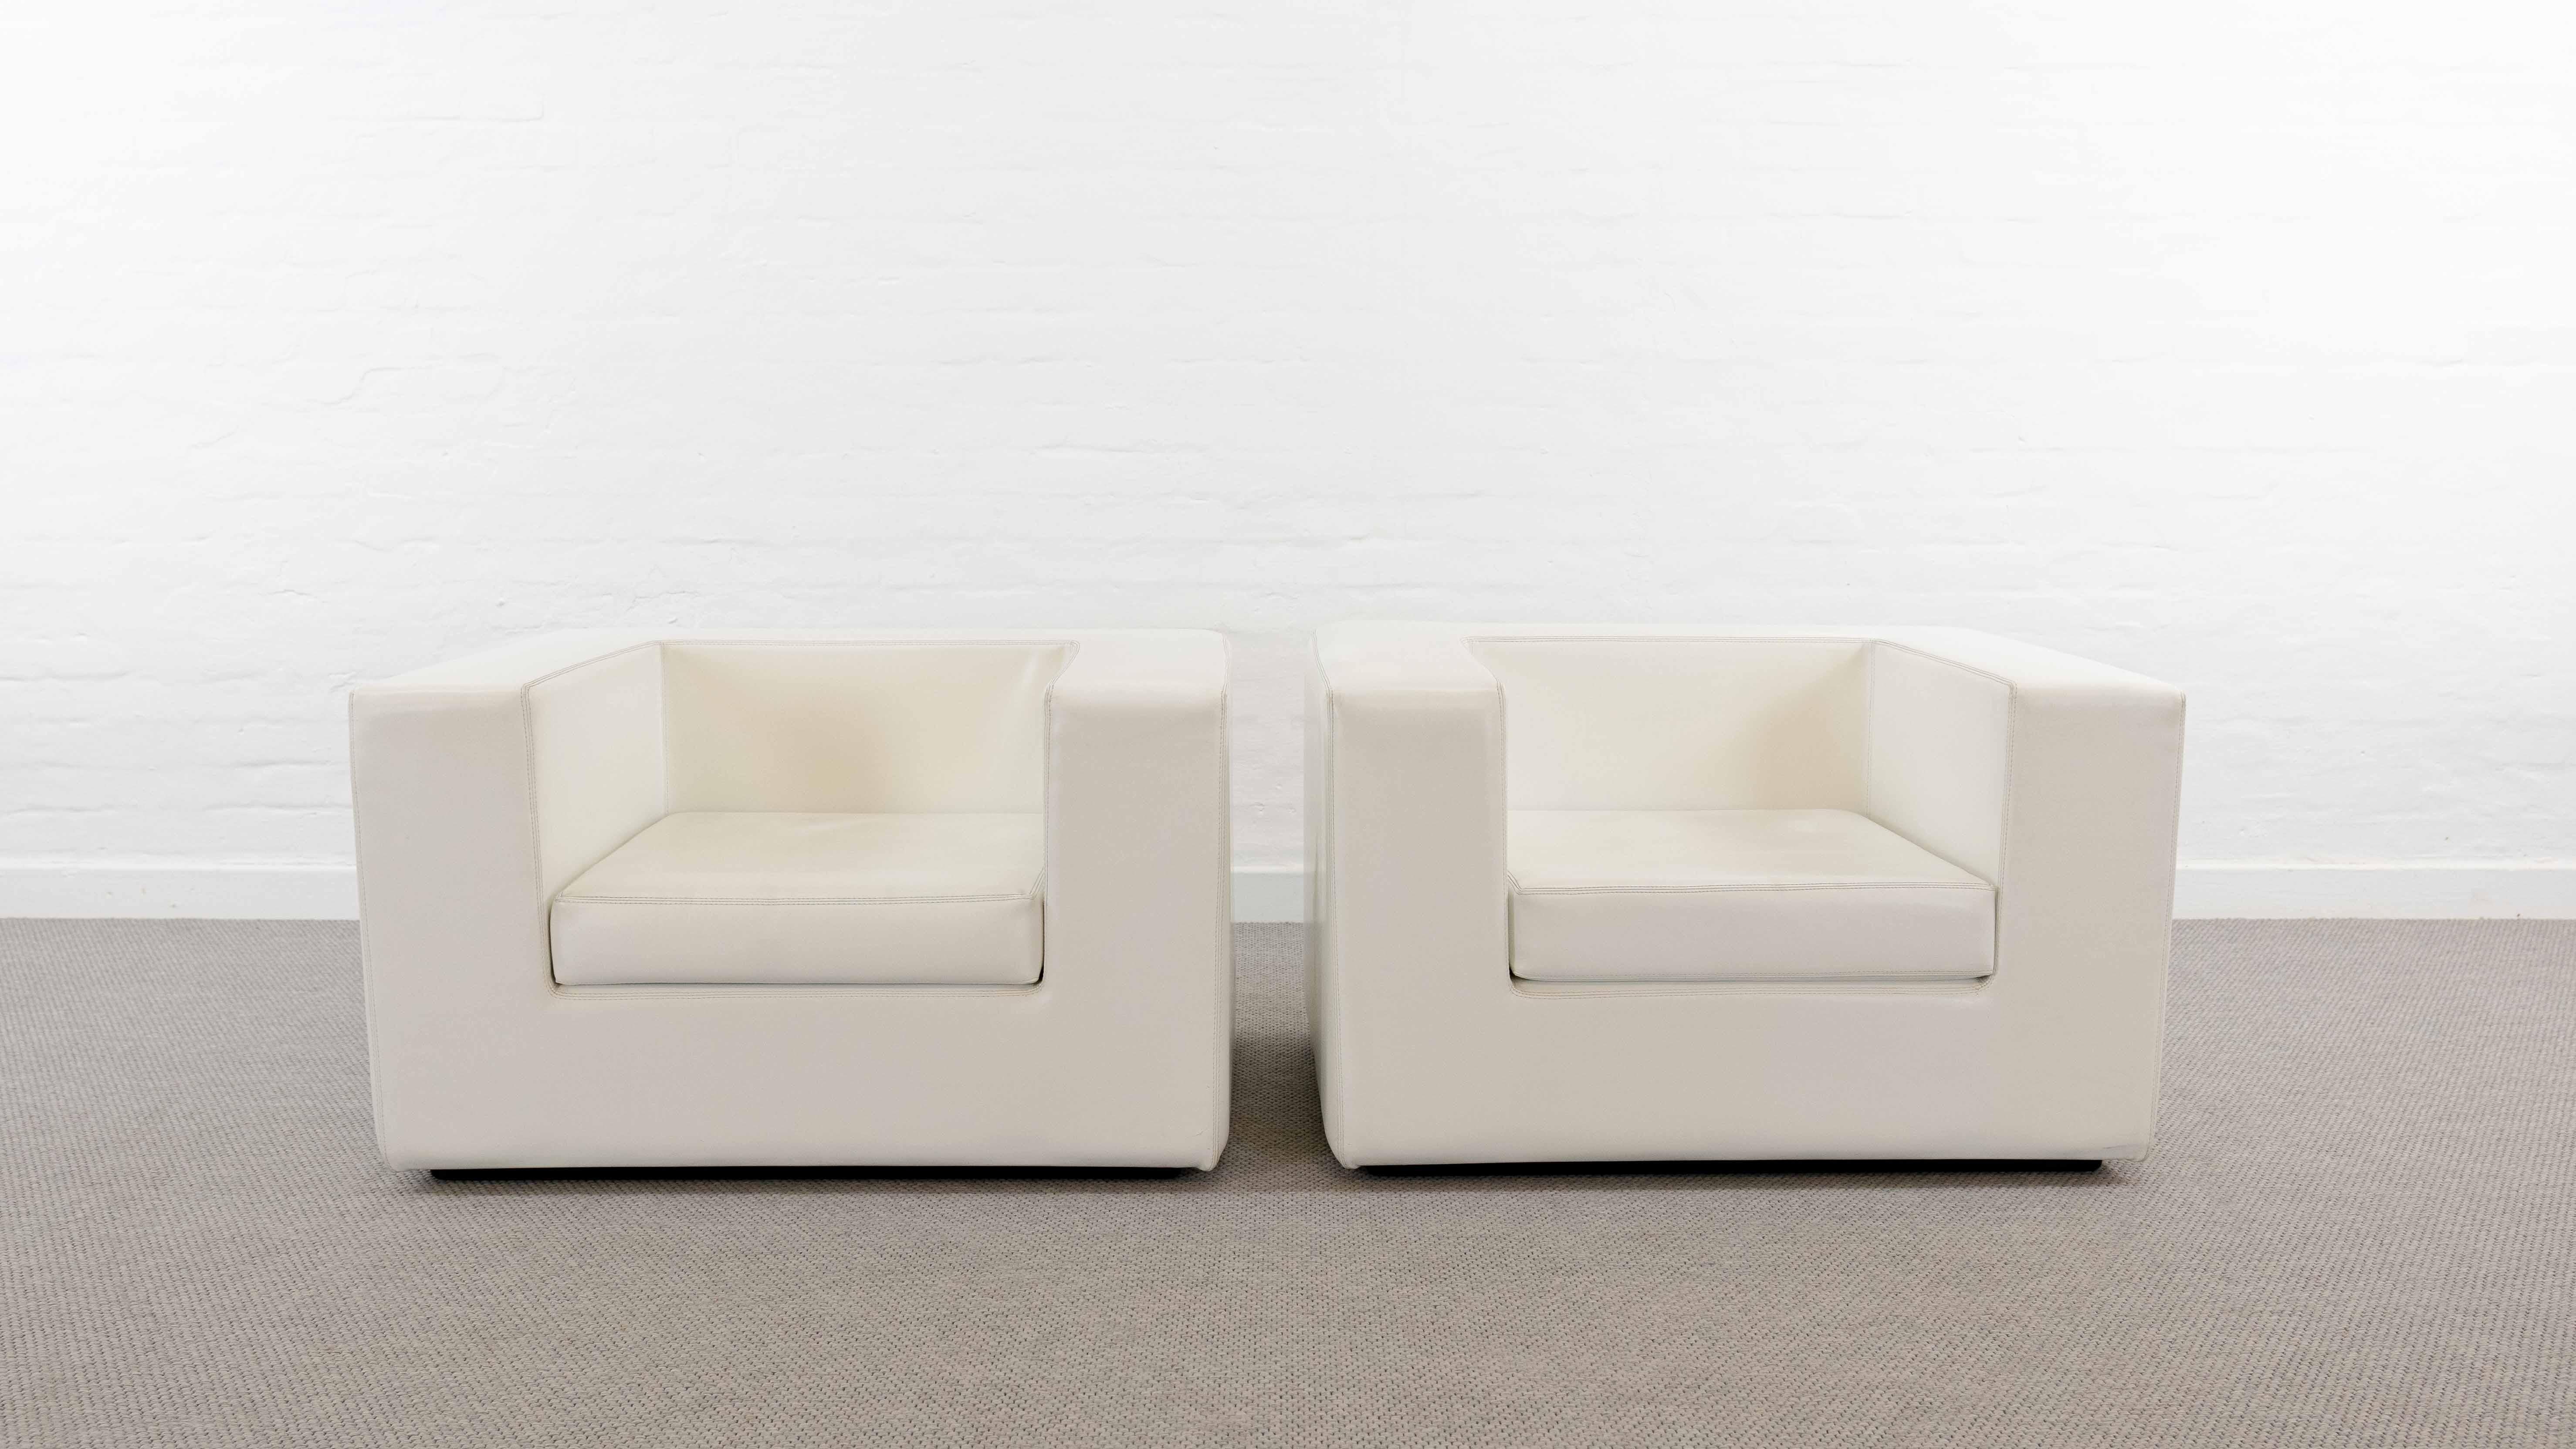 Pair of vintage armchairs, model “ Throw Away“. Designed by Willie Landels 1965 for Zanotta, Italy. The Throw Away is the first sofa made from expanded polyurethane foam. Upholstered in original white /offwhite vinyl. This is a production of the 60s